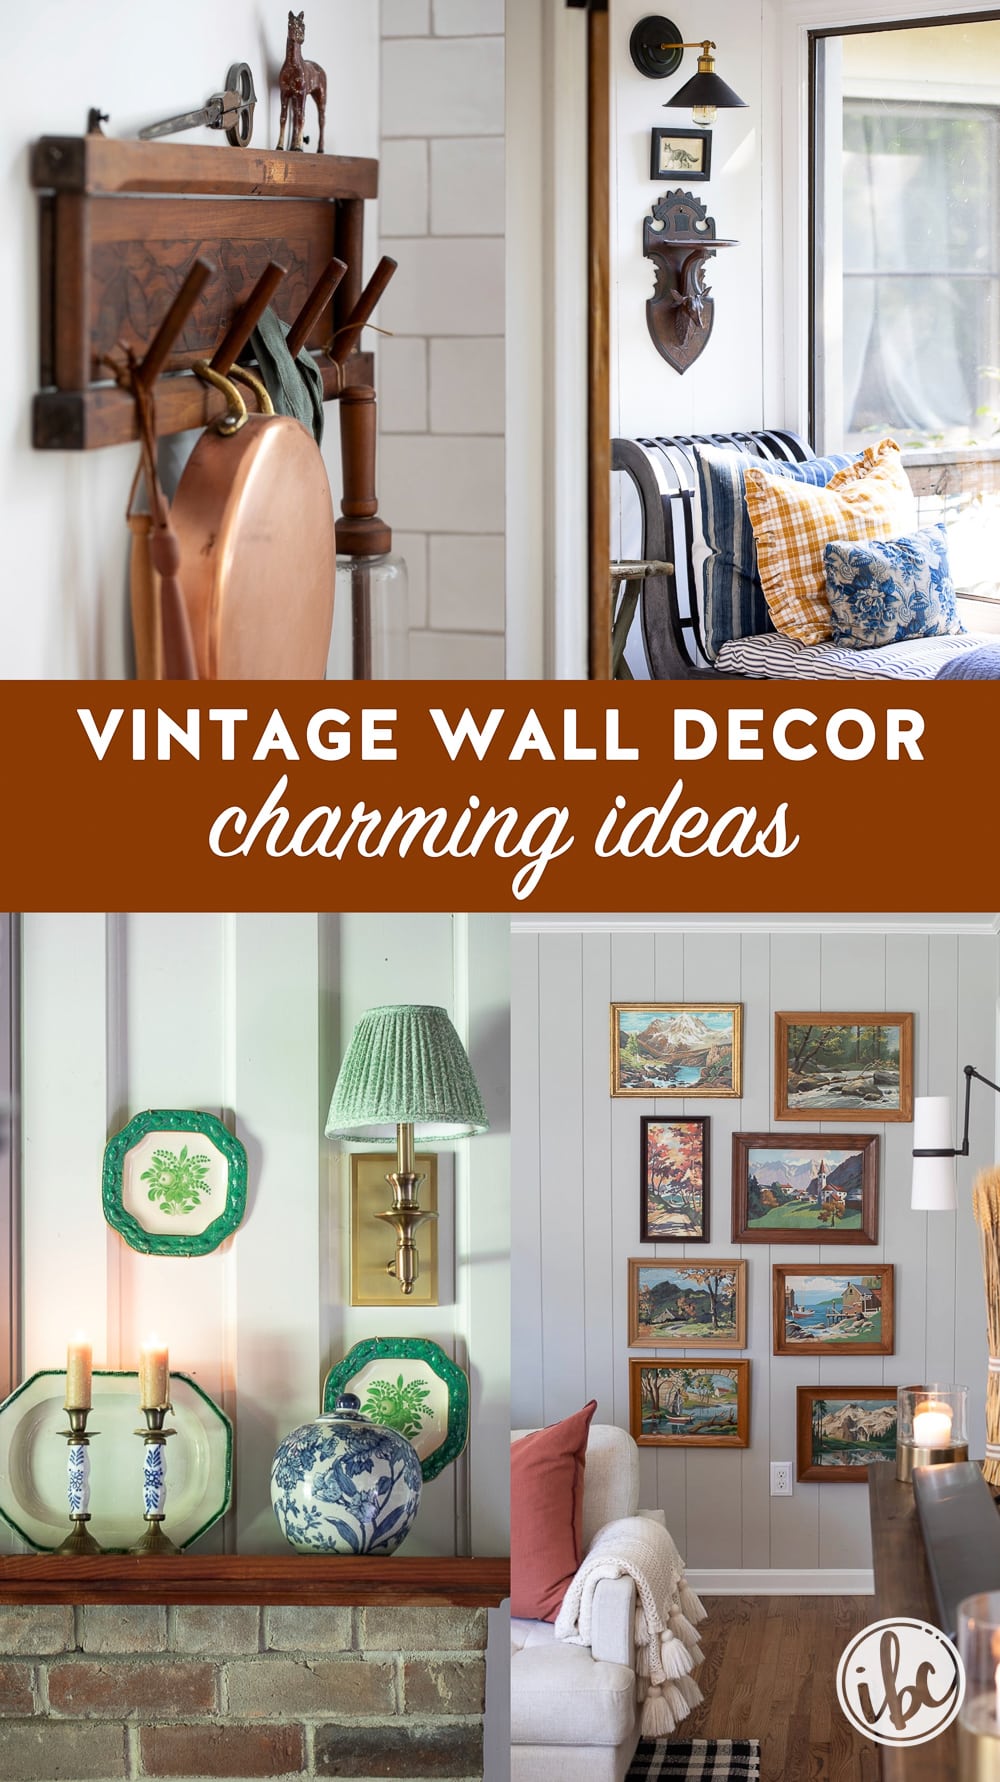 vintage wall decor ideas including shelves and art.